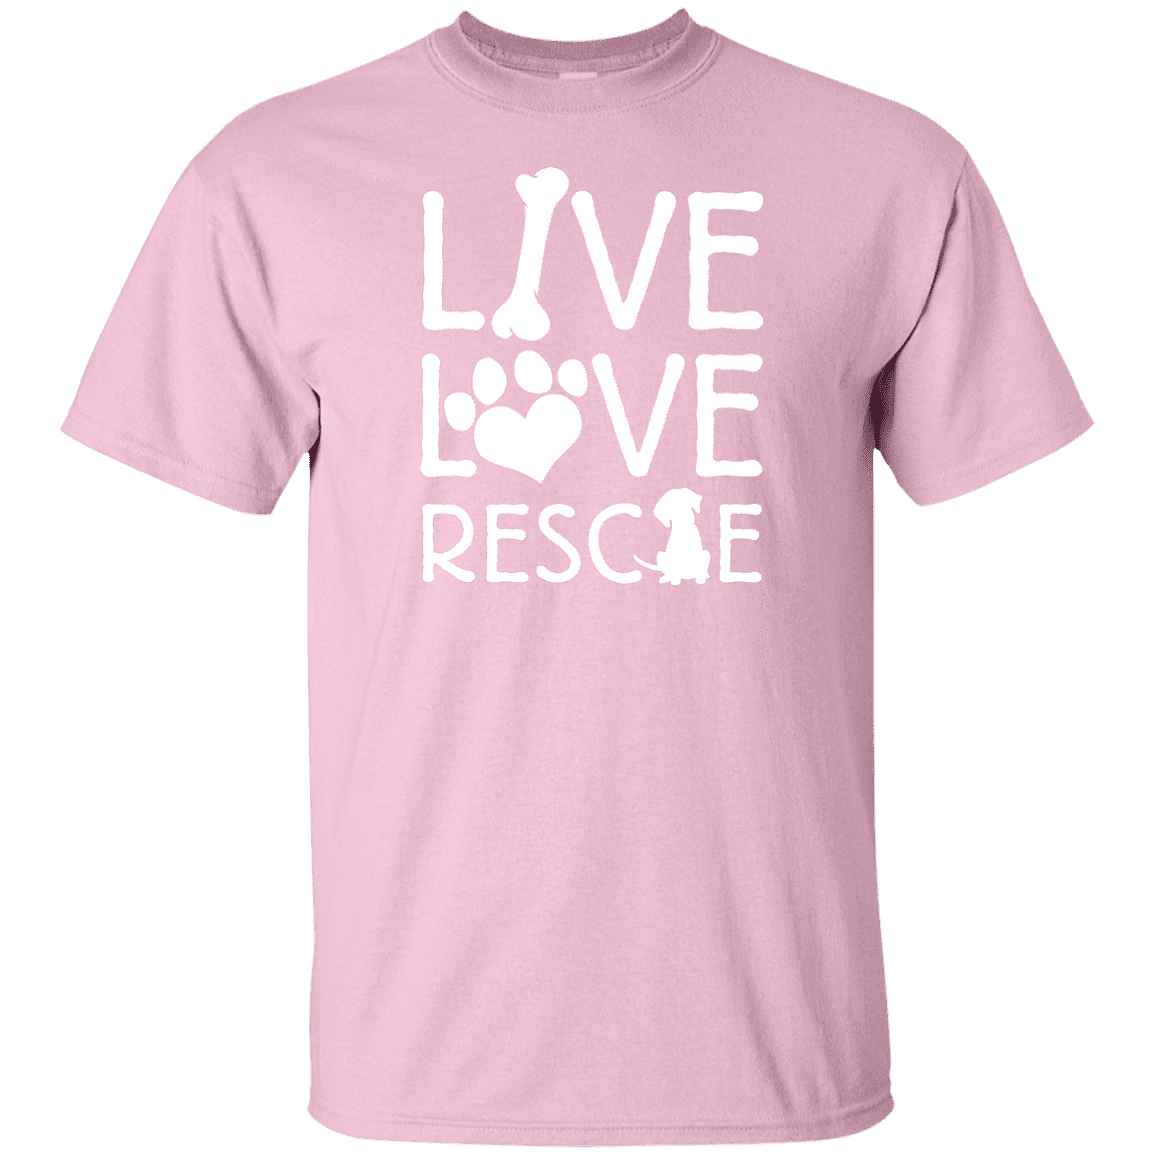 Live Love Rescue - Youth T Shirt.